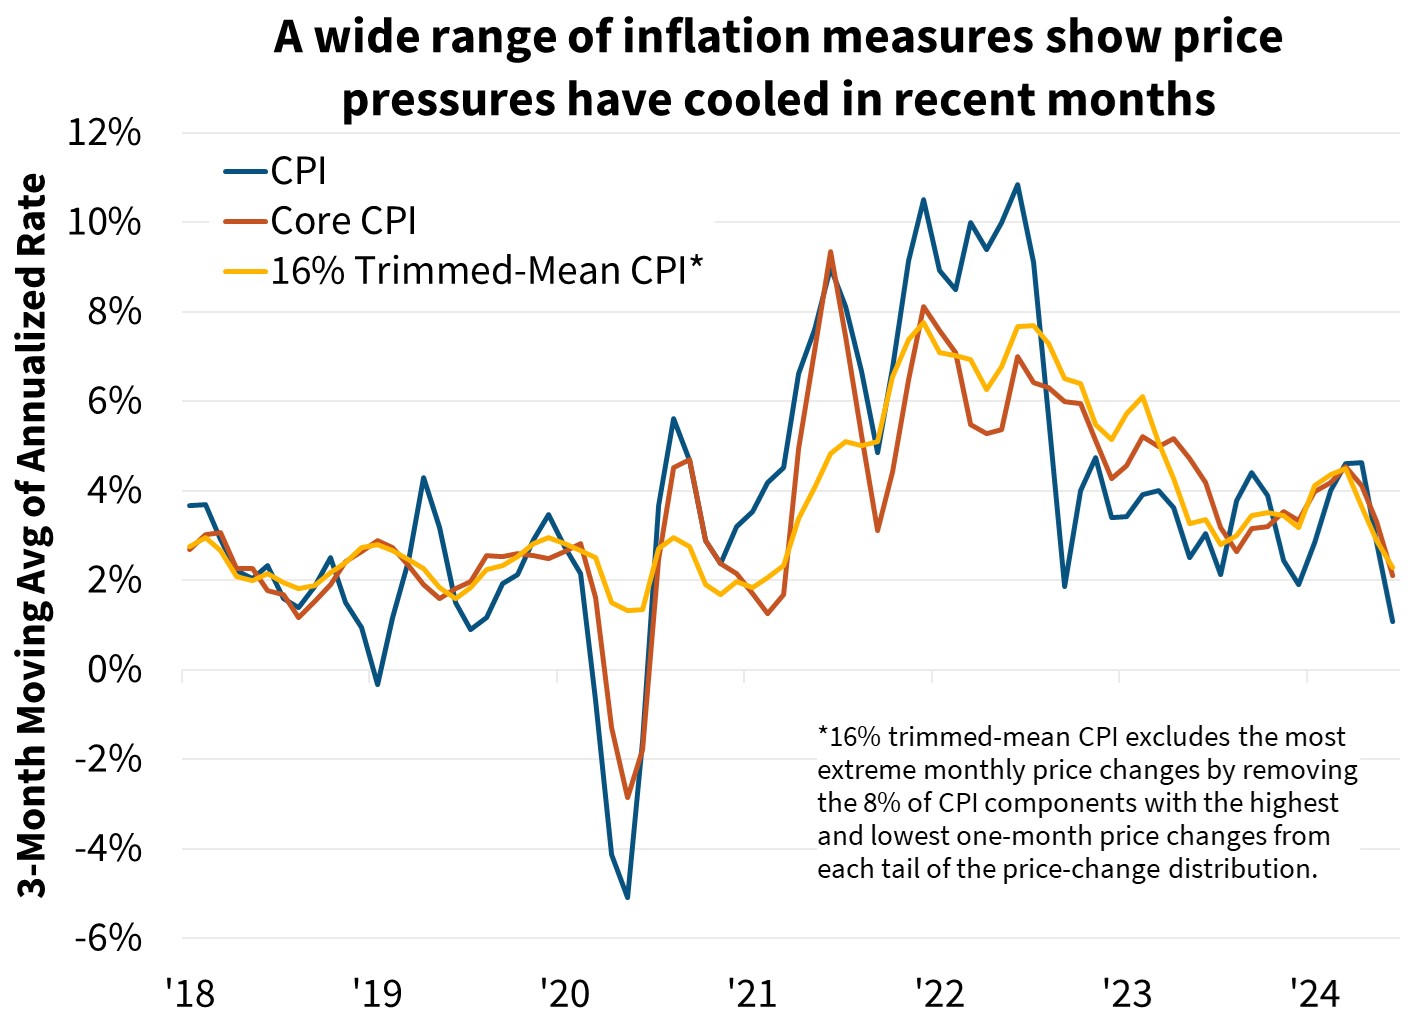 A wide range of inflation measures show price pressures have cooled in recent months